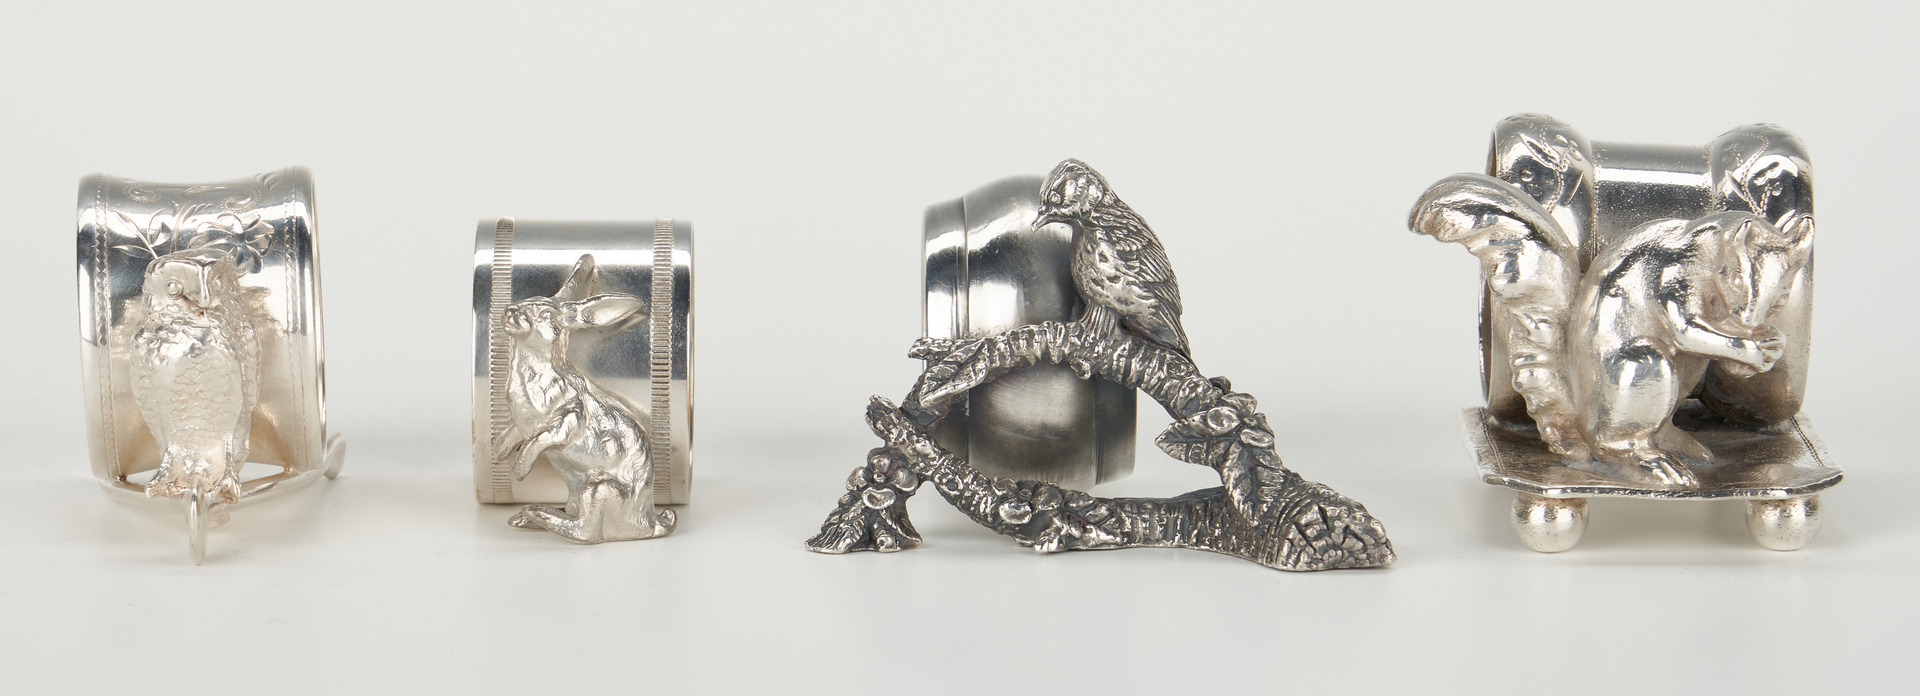 Lot 251: 12 Silverplated Napkin Rings, incl. Animals